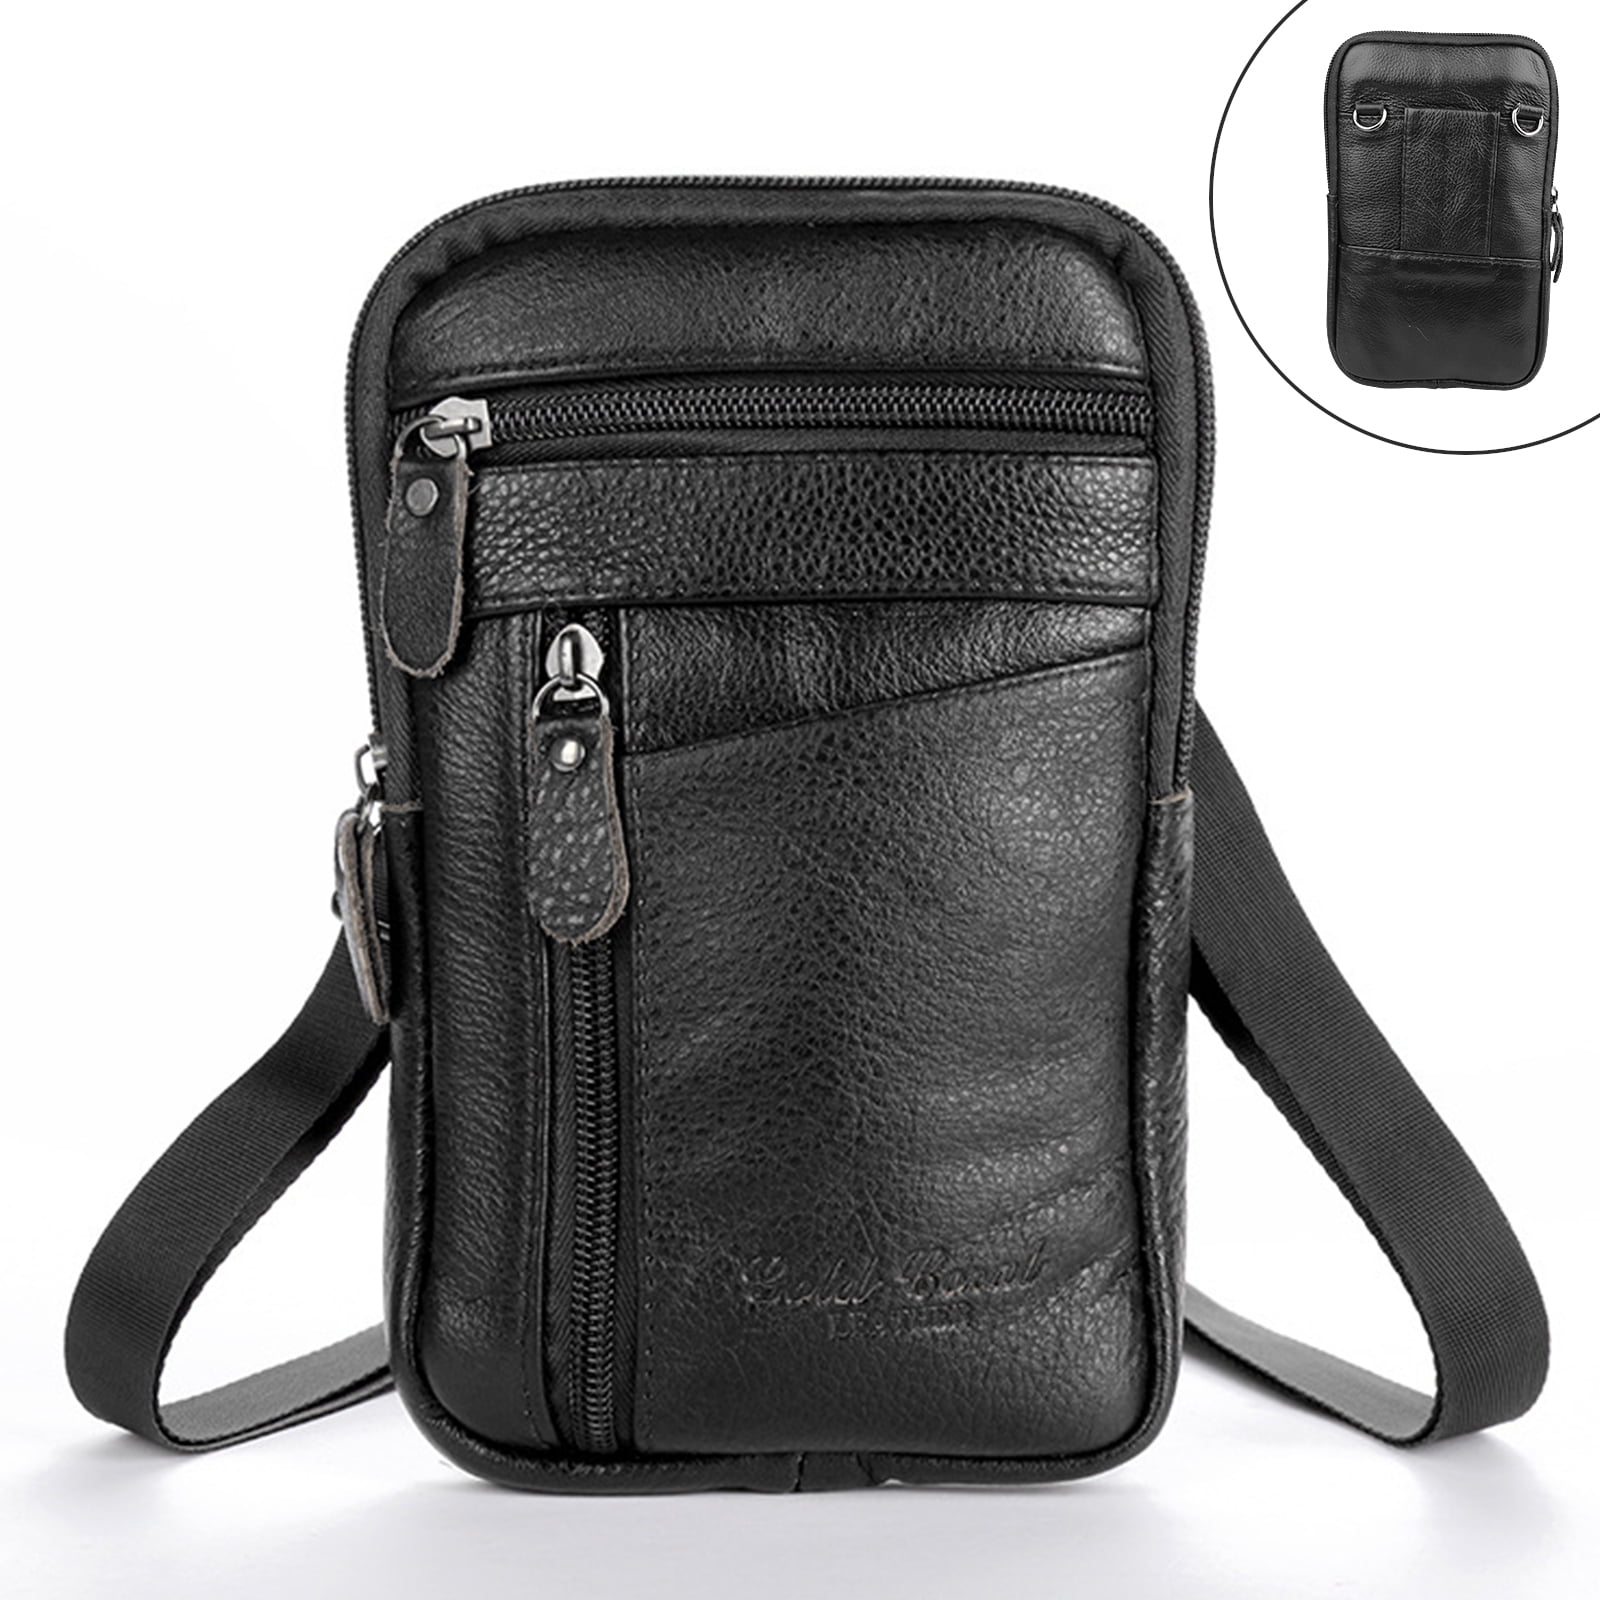 Waterproof Non-Slip Wearable Crossbody Bag fitness bag Shoulder Bag Loopy Fruits Picture